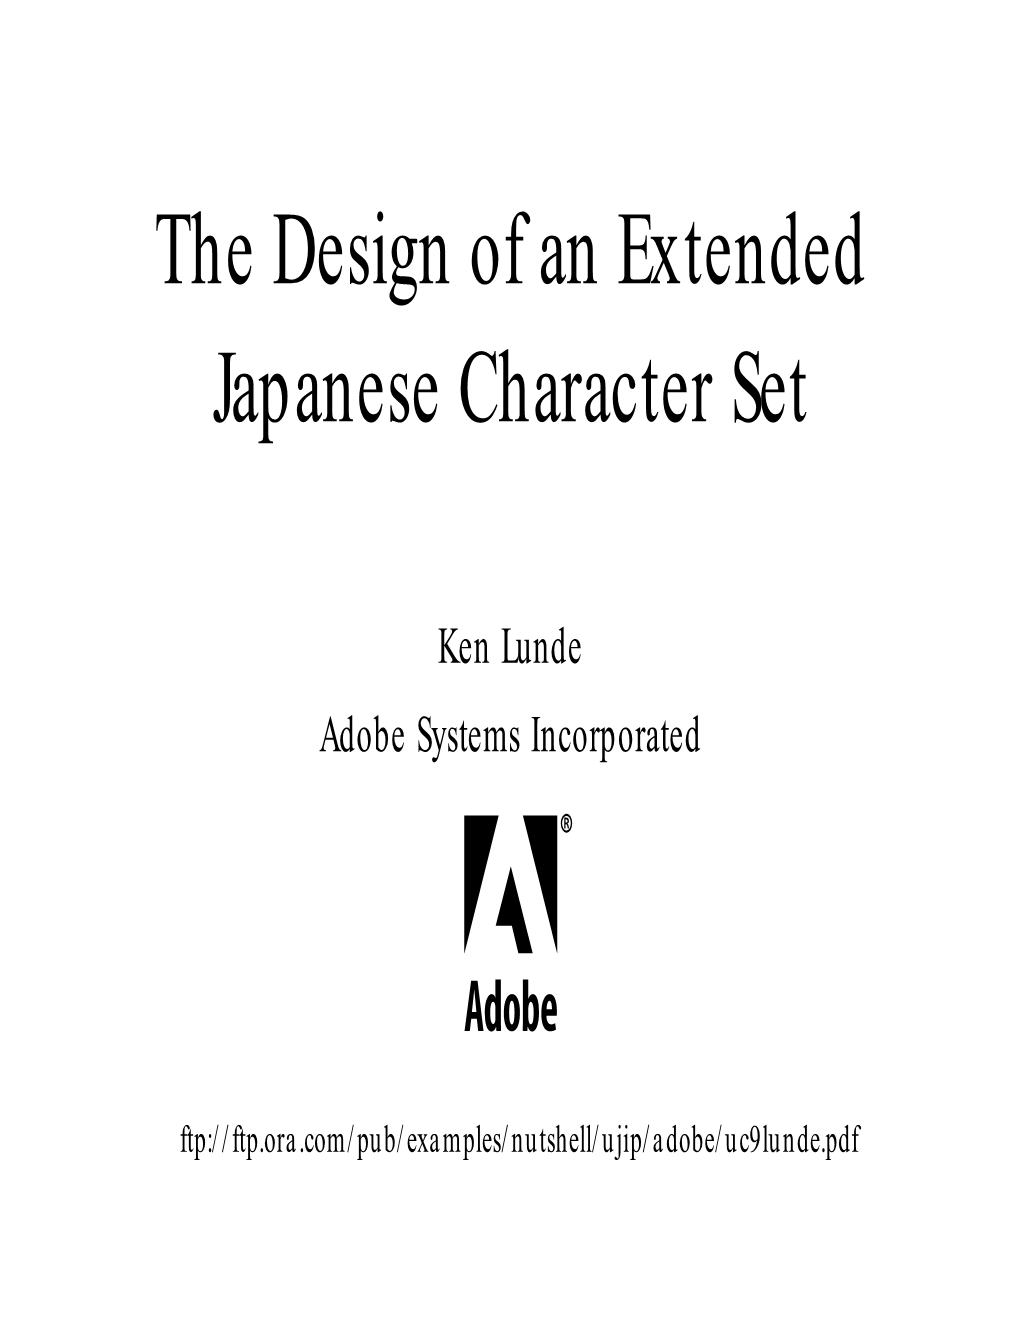 The Design of an Extended Japanese Character Set